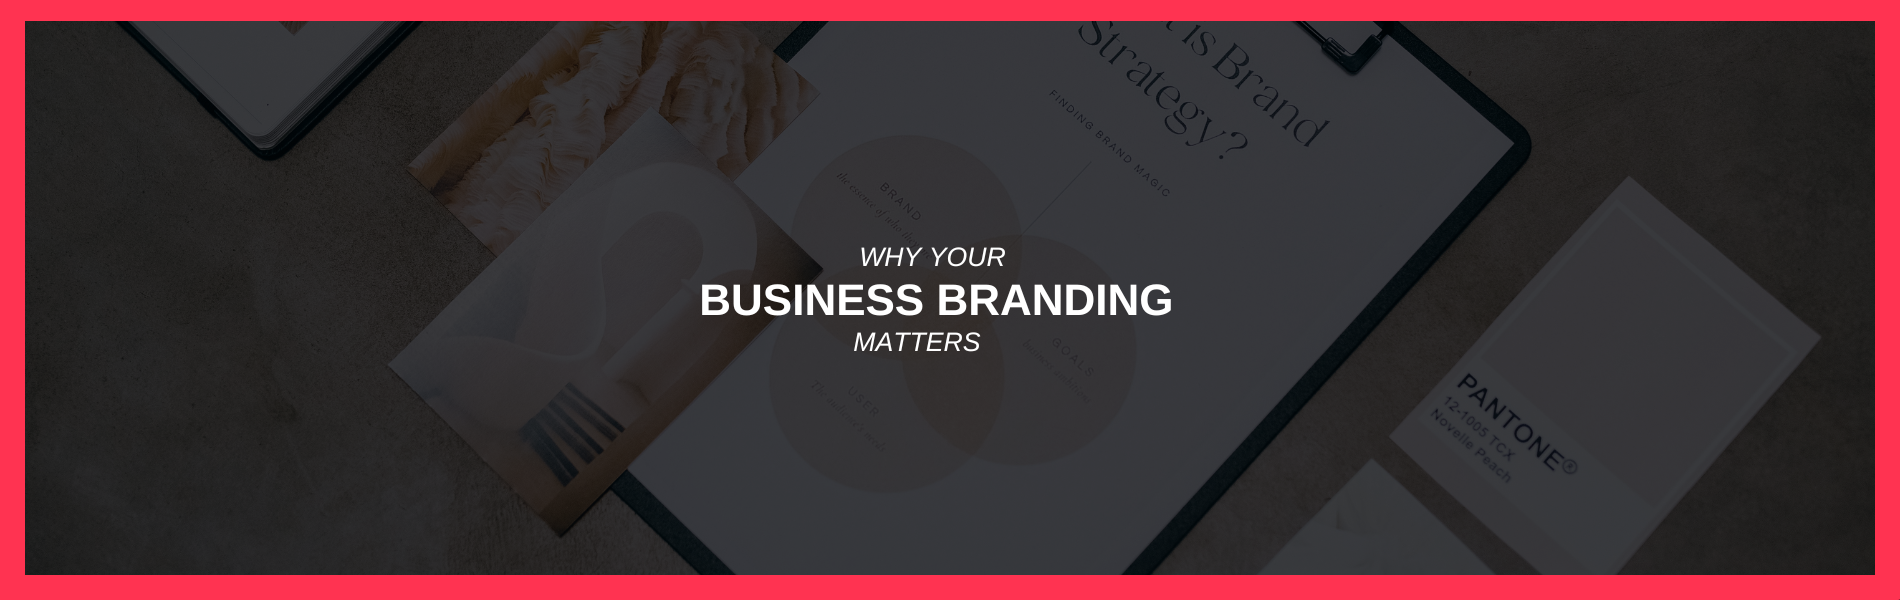 Why Your Business Branding Matters